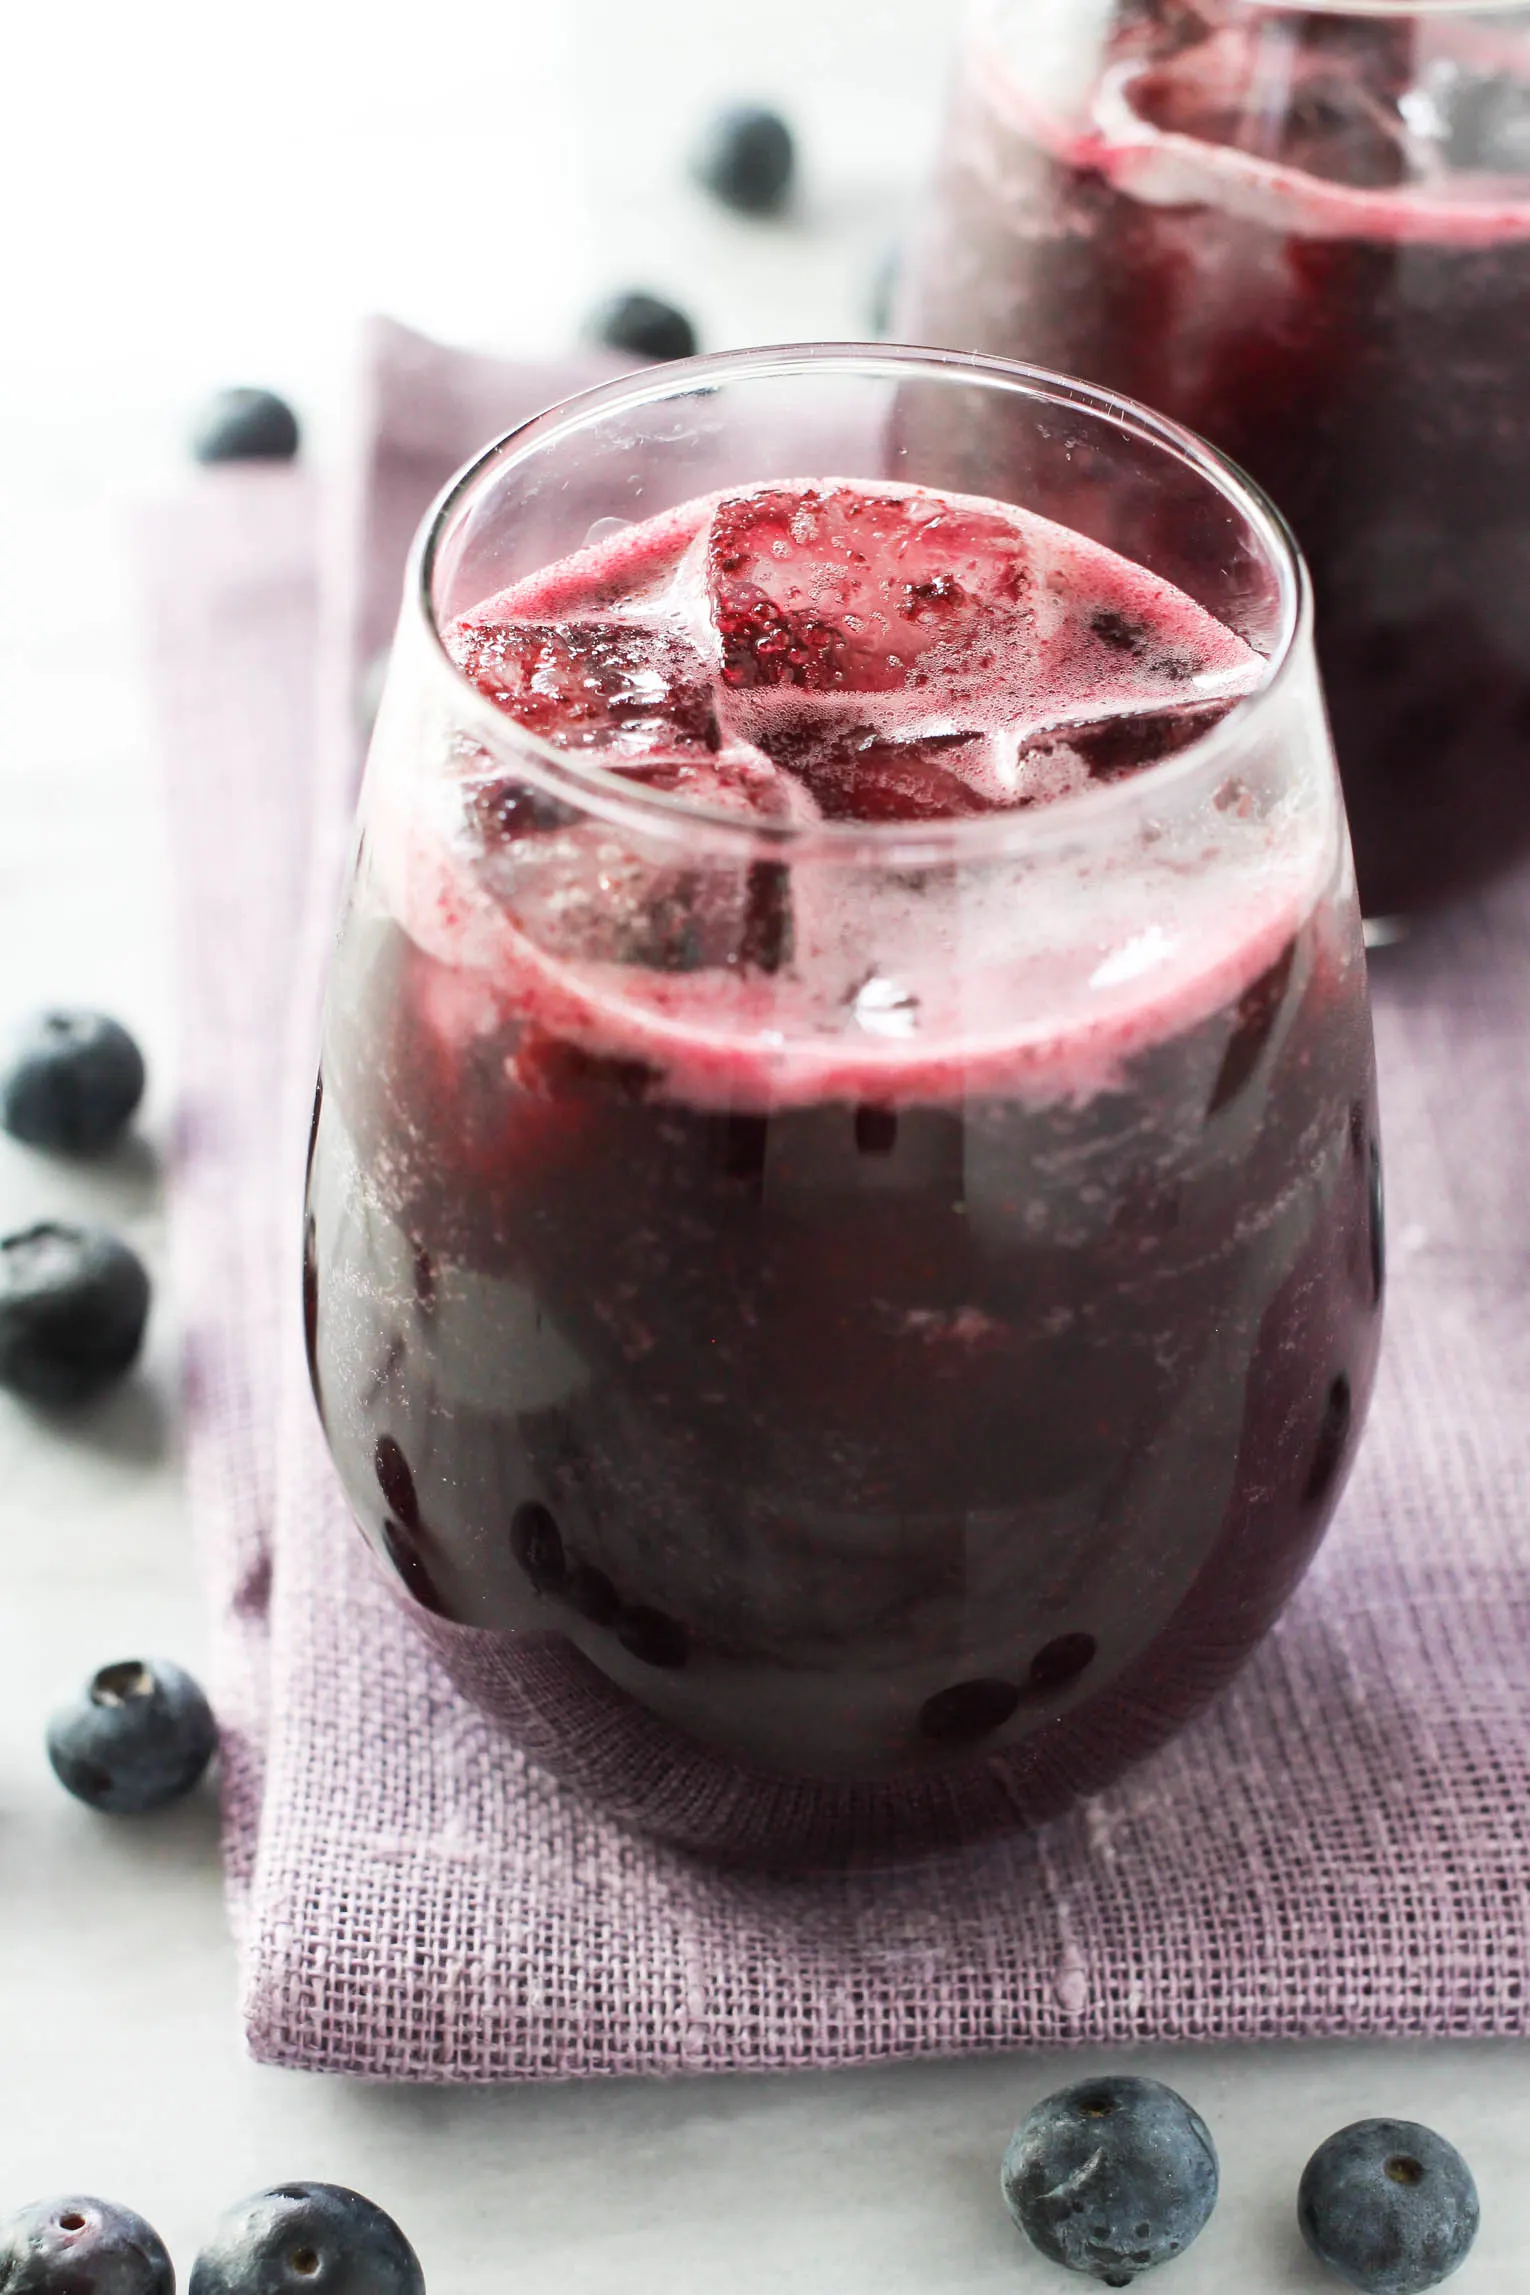 A glass with blueberry juice standing on a purple napkin. Fresh blueberries scattered around the glass.